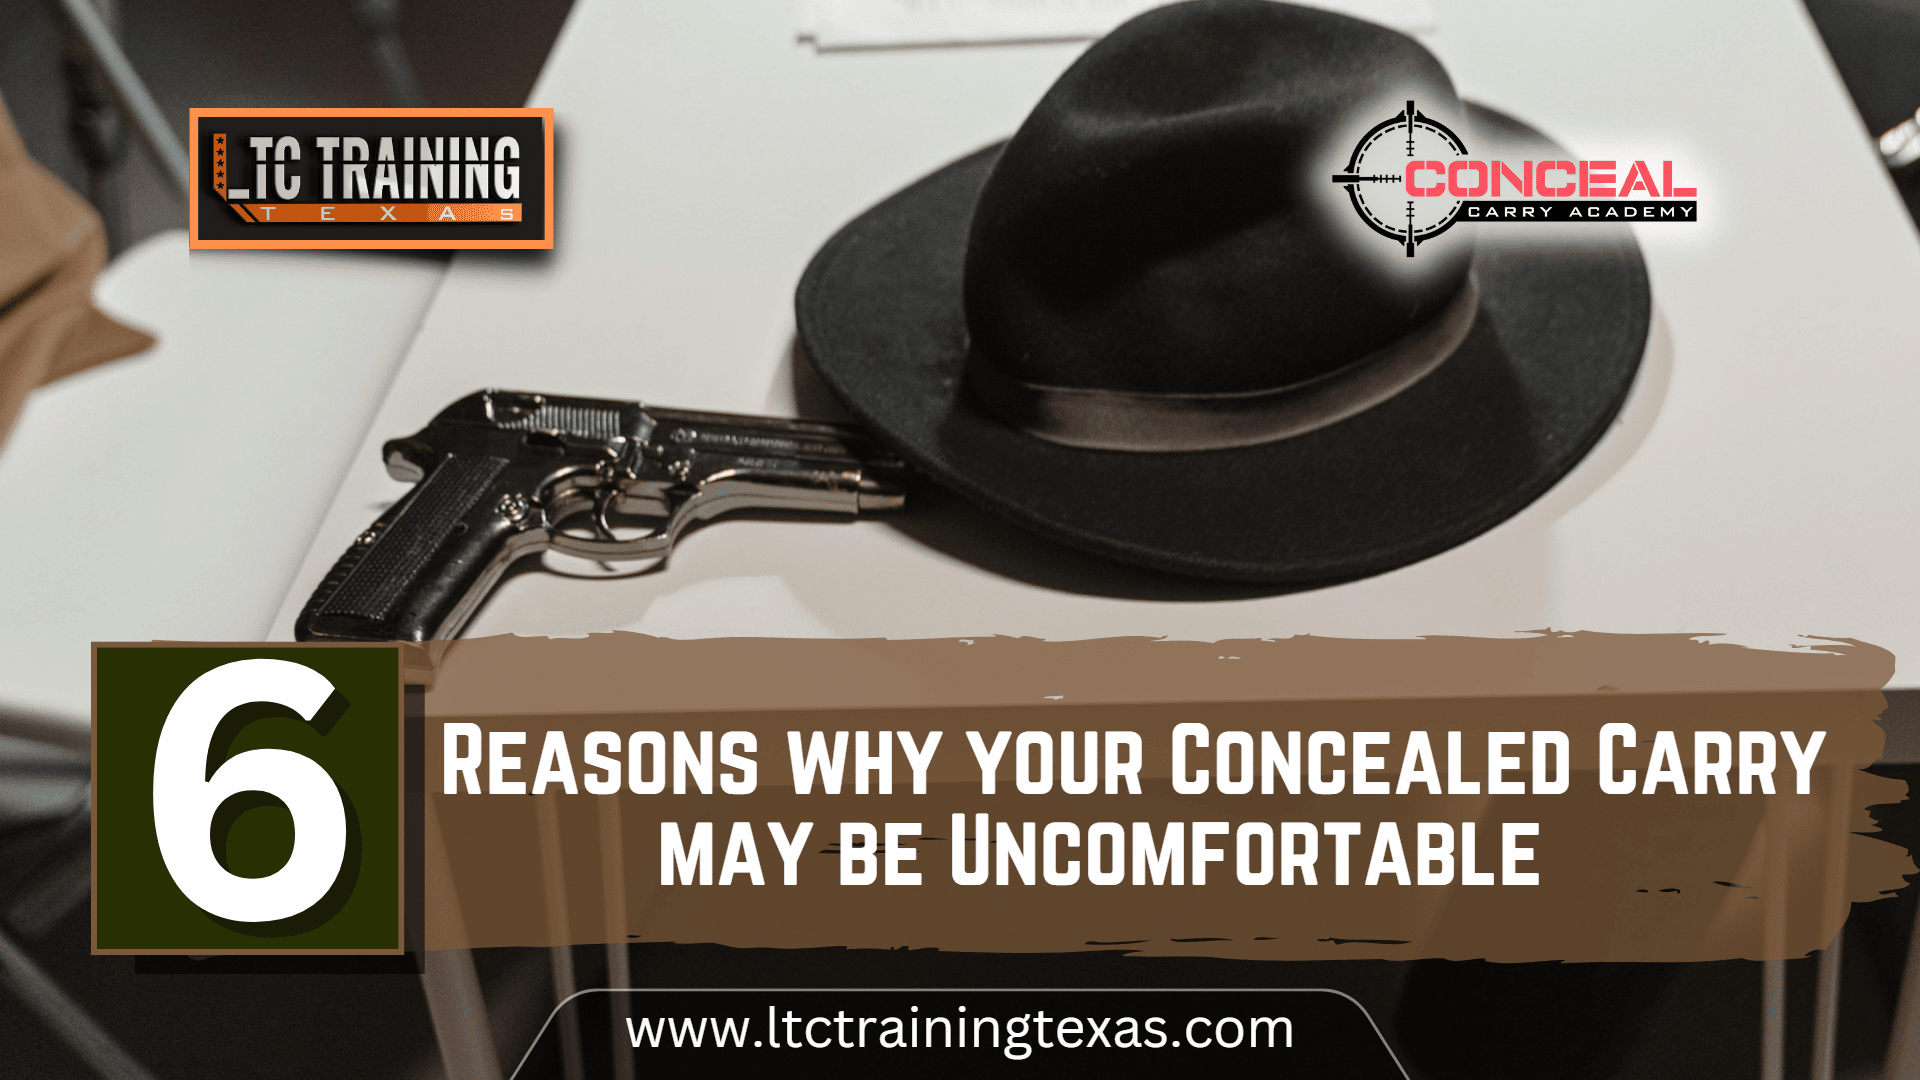 6 Reasons why your Concealed Carry may be Uncomfortable